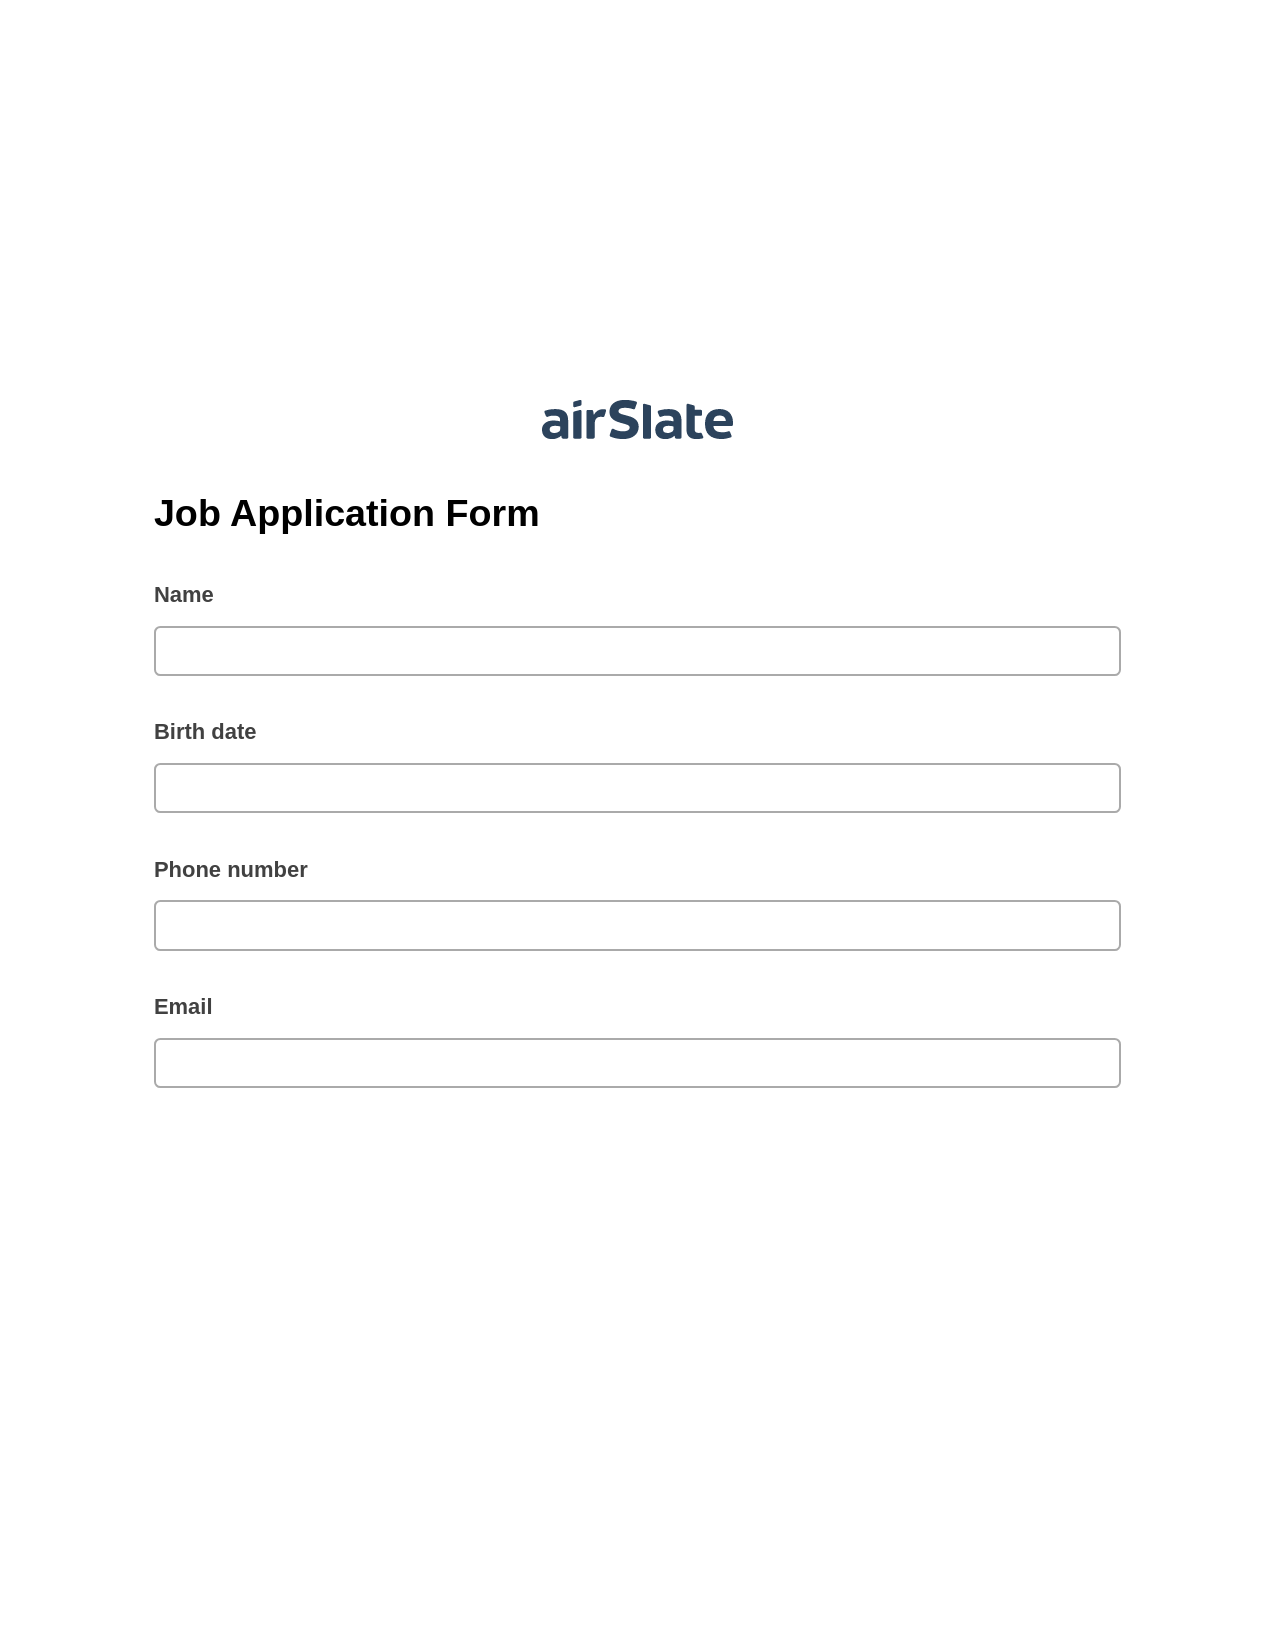 Multirole Job Application Form Pre-fill from CSV File Dropdown Options Bot, Reminder Bot, Text Message Notification Postfinish Bot